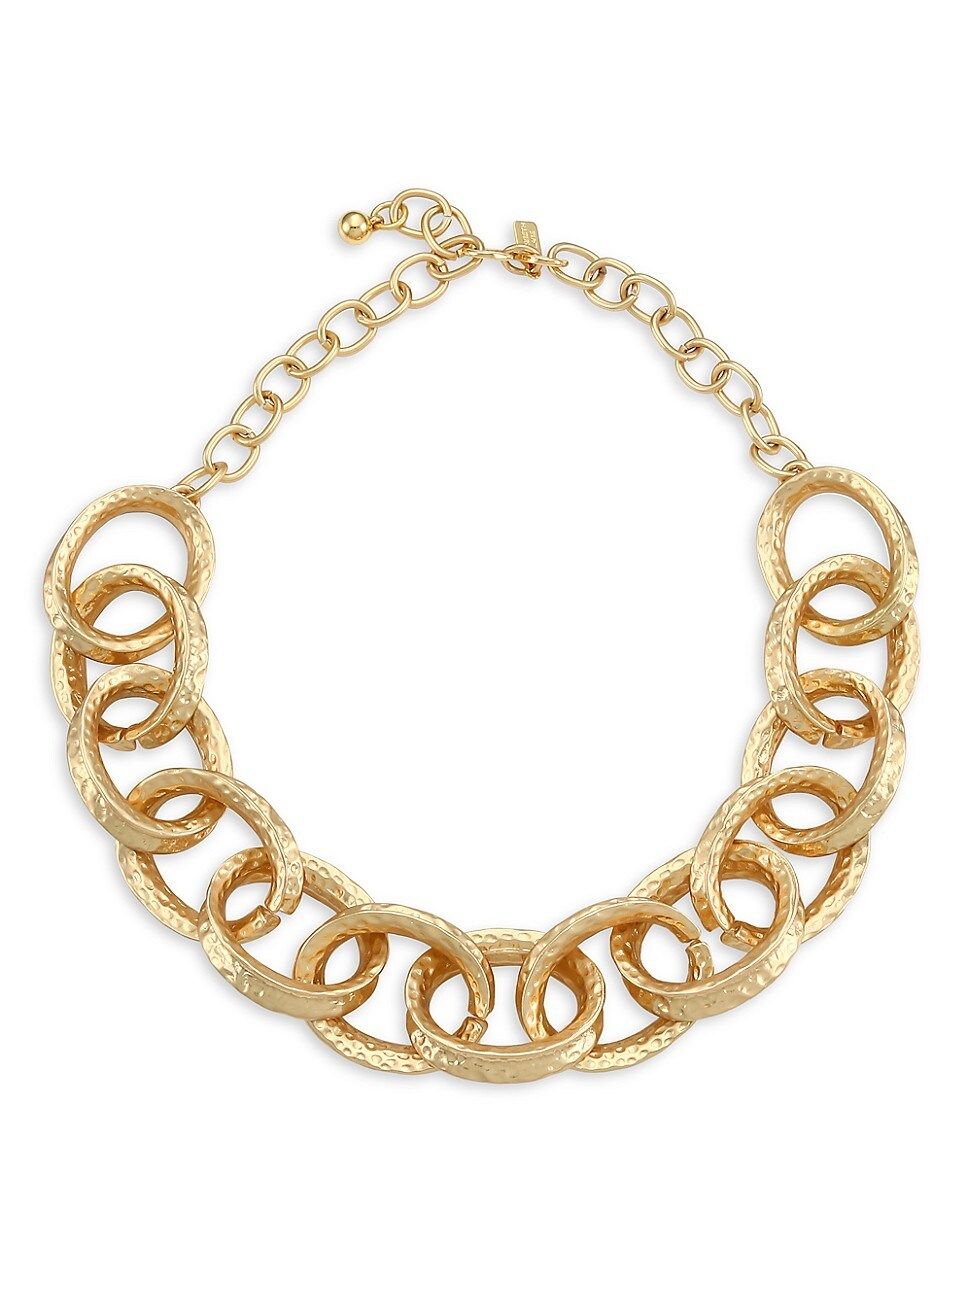 Kenneth Jay Lane Women's 22K Goldplated Hammered Oval-Link Necklace - Yellow Goldtone | Saks Fifth Avenue